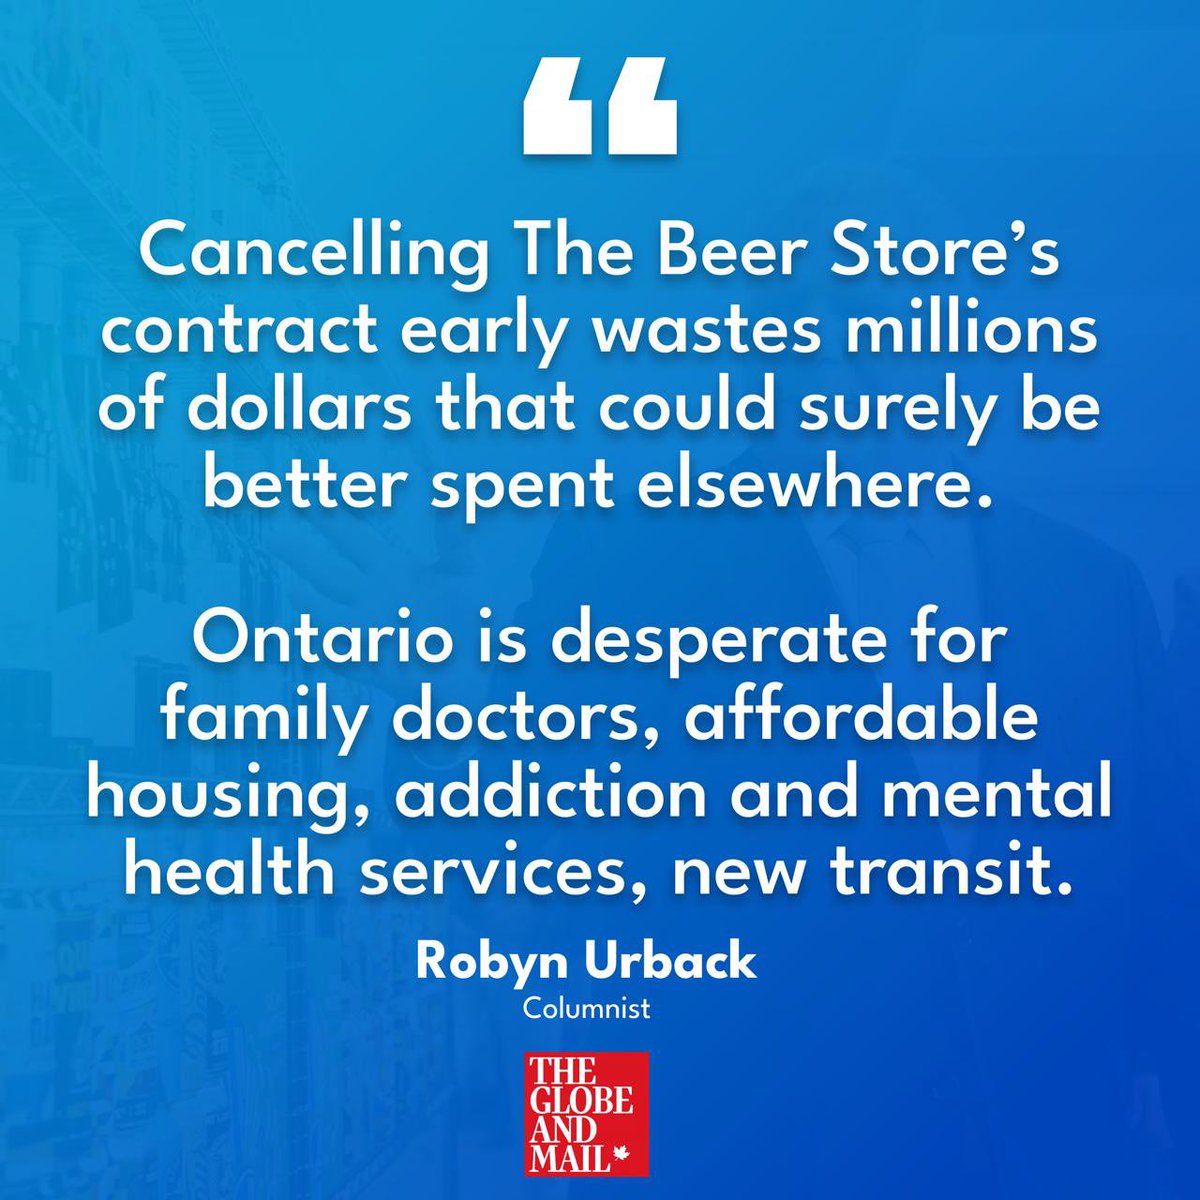 Doug Ford isn’t in it for you or your family, he’s in it for his wealthy well-connected insiders and friends. Shame on him for wasting a billion bucks to speed up booze access by just one year when that money could have gone toward building new homes, hiring more doctors, or